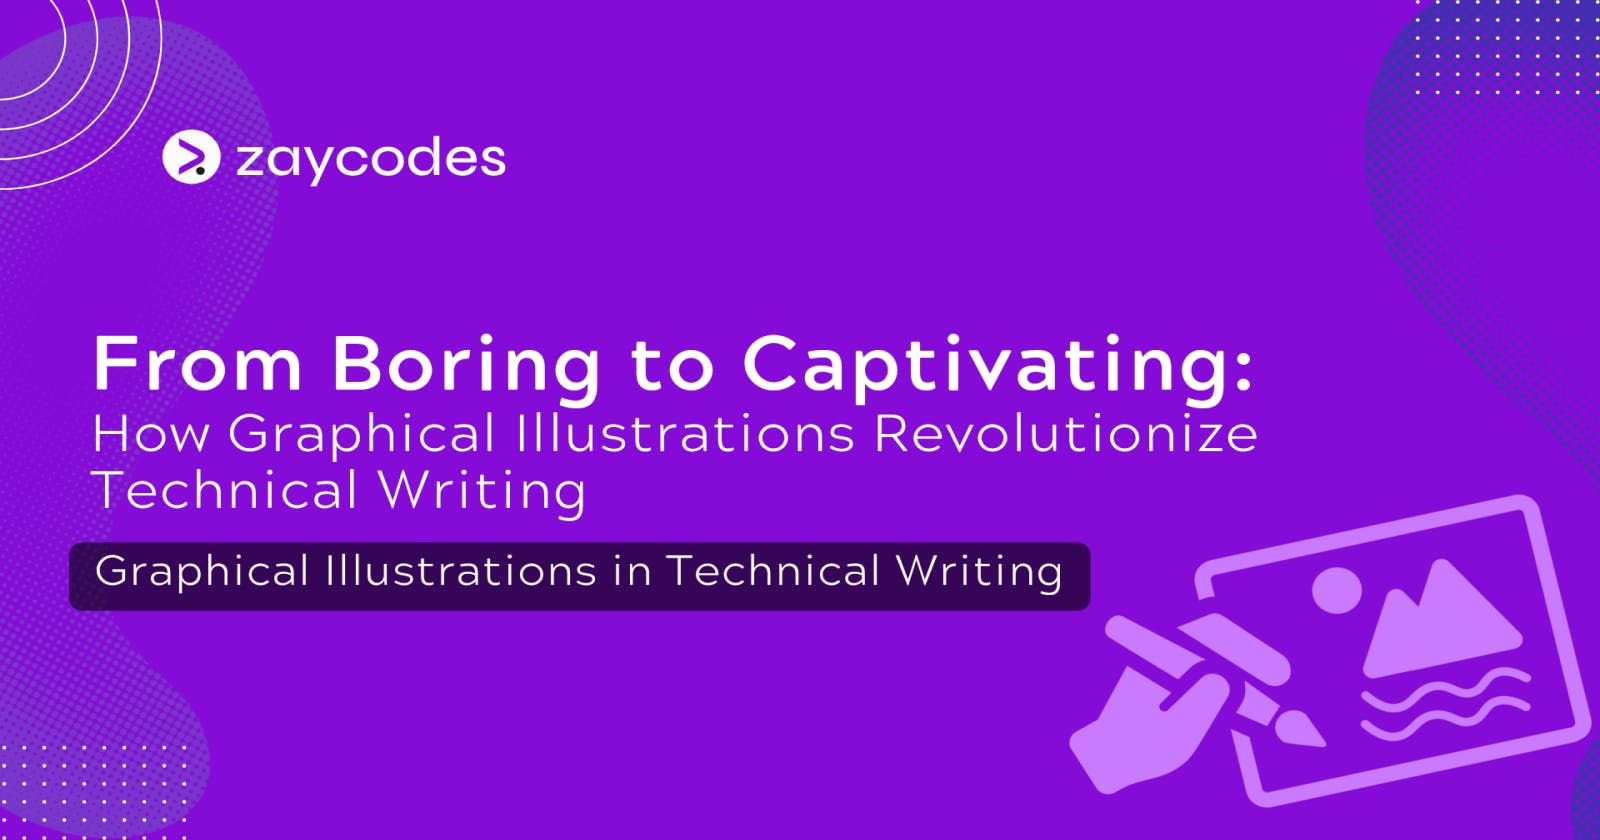 From Boring to Captivating: How Graphical Illustrations Revolutionize Technical Writing